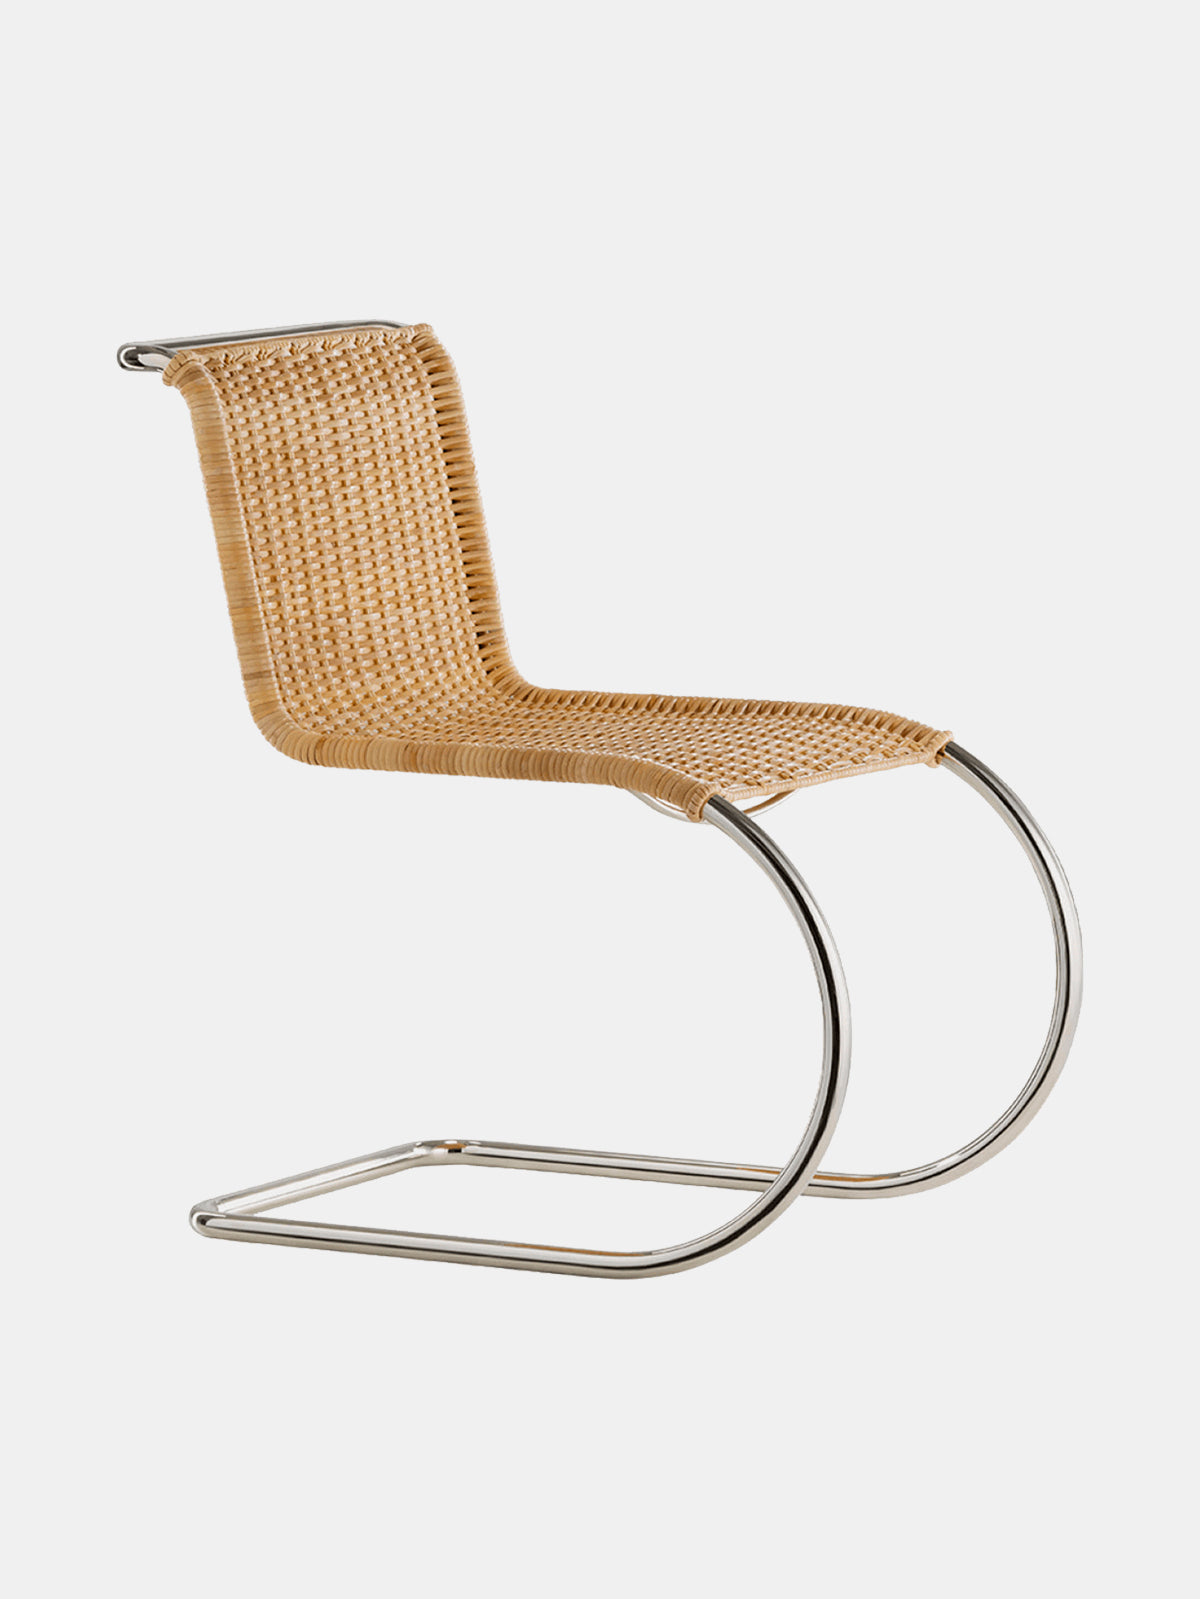 B42 Cantilever Chair designed by Mies Van der Rohe